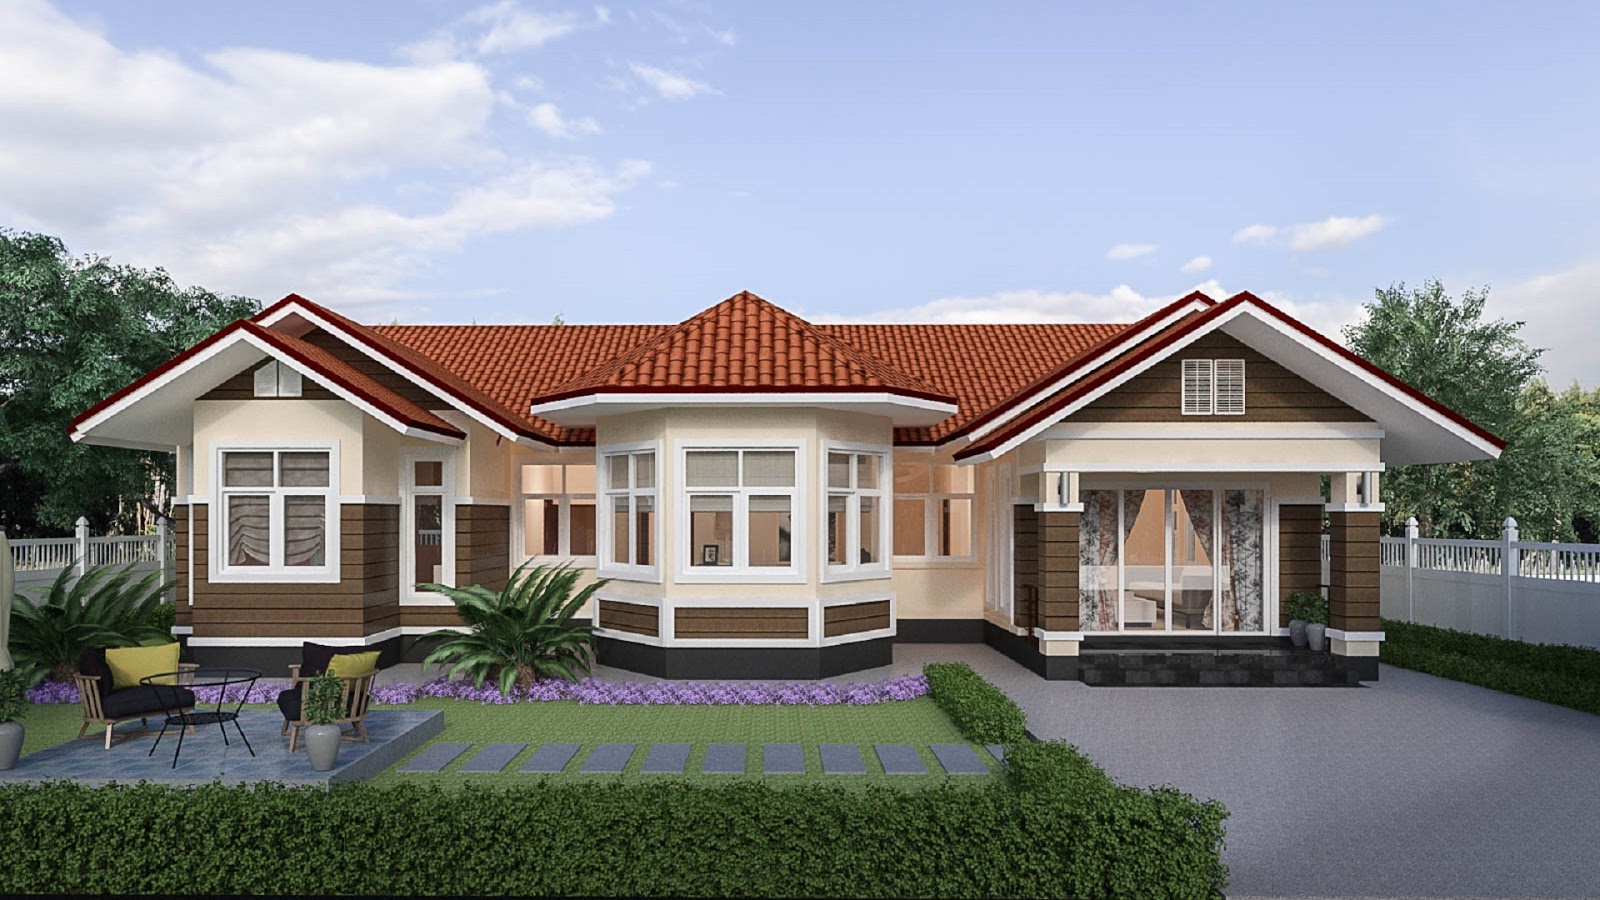 When it is time to build a house for your own family, it is important to consider their needs and get as many ideas you can for your plan. For a family with two or more children, a house with three bedrooms can be considered perfect or ideal family home. How about the design of the house? Do you love a spacious so that you and your family can freely move around? Aside from being a comfortable home, we also want a house with a timeless design so it will remain stylish for a long period of time right?  If you are looking for that kind of house, you may get some ideas in this post! We compiled 22 houses with floor plans designed to have two to three-bedrooms to meet the needs of the family. All are projects of ubon338.com in Thailand.